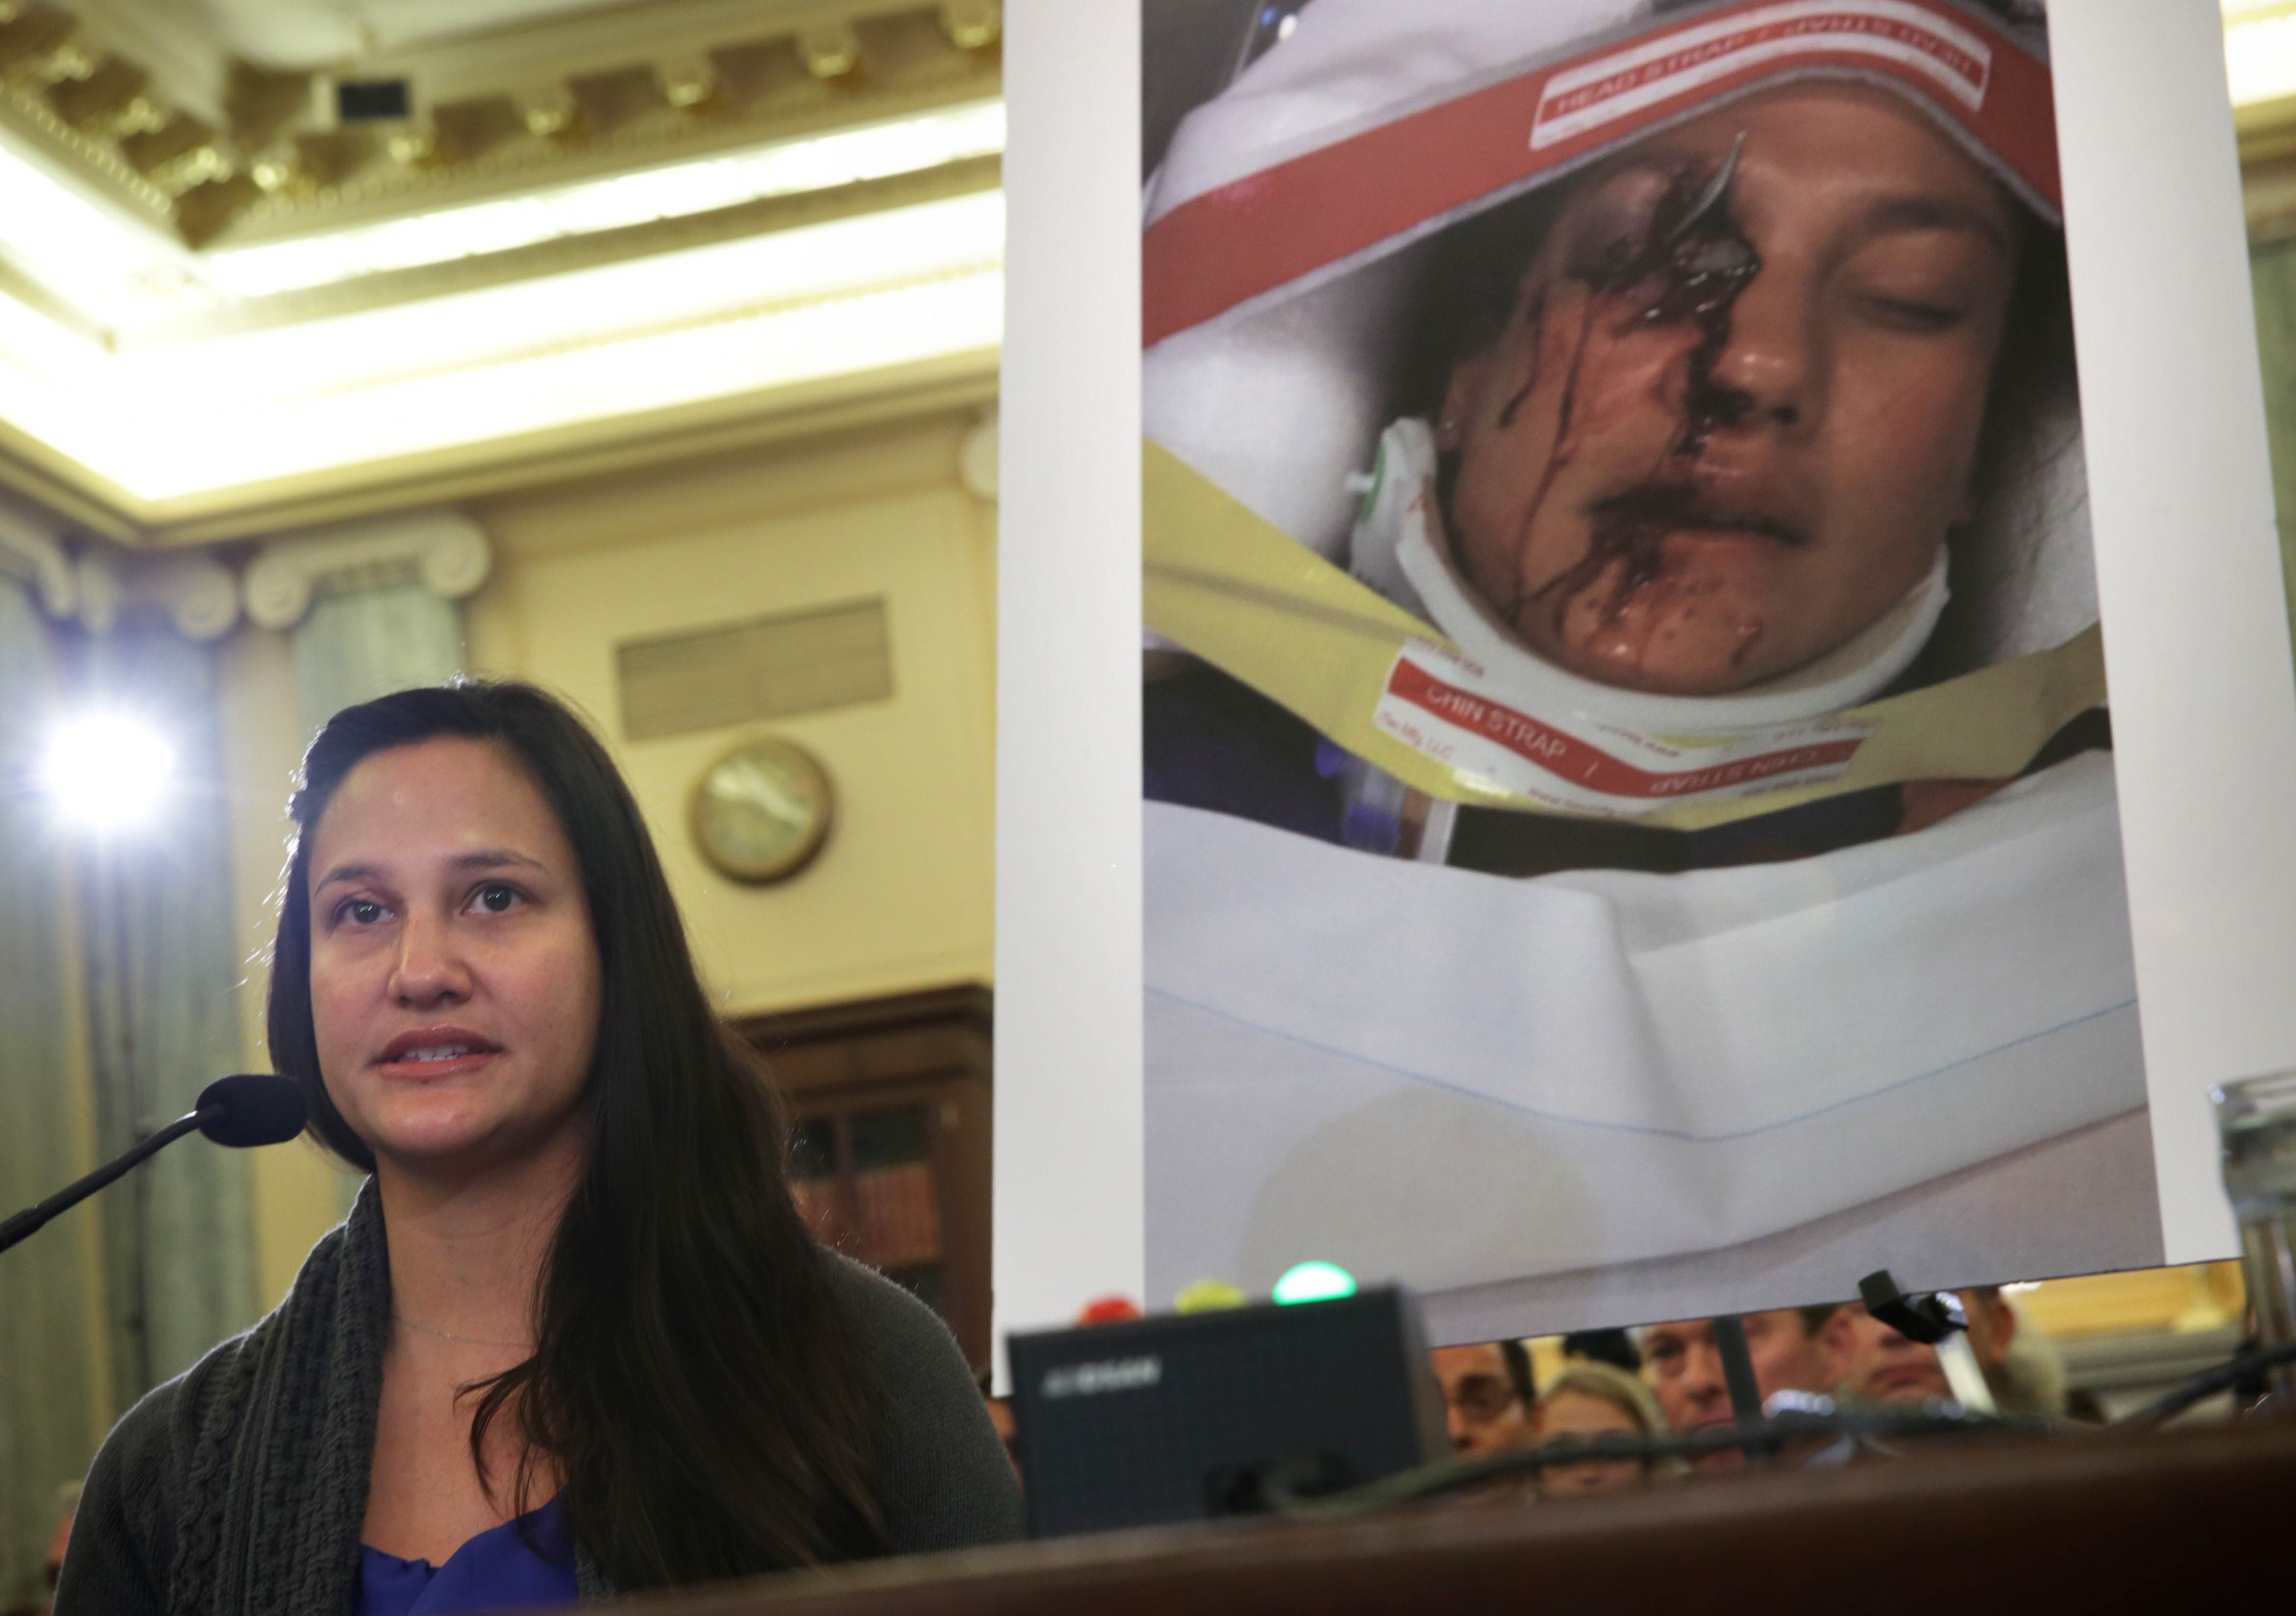 Florida citizen Stephanie Erdman, who was seriously injured by the airbag explosion in her Honda Civic last year, testifies during a hearing before the Senate Commerce, Science and Transportation Committee. Photo: AFP